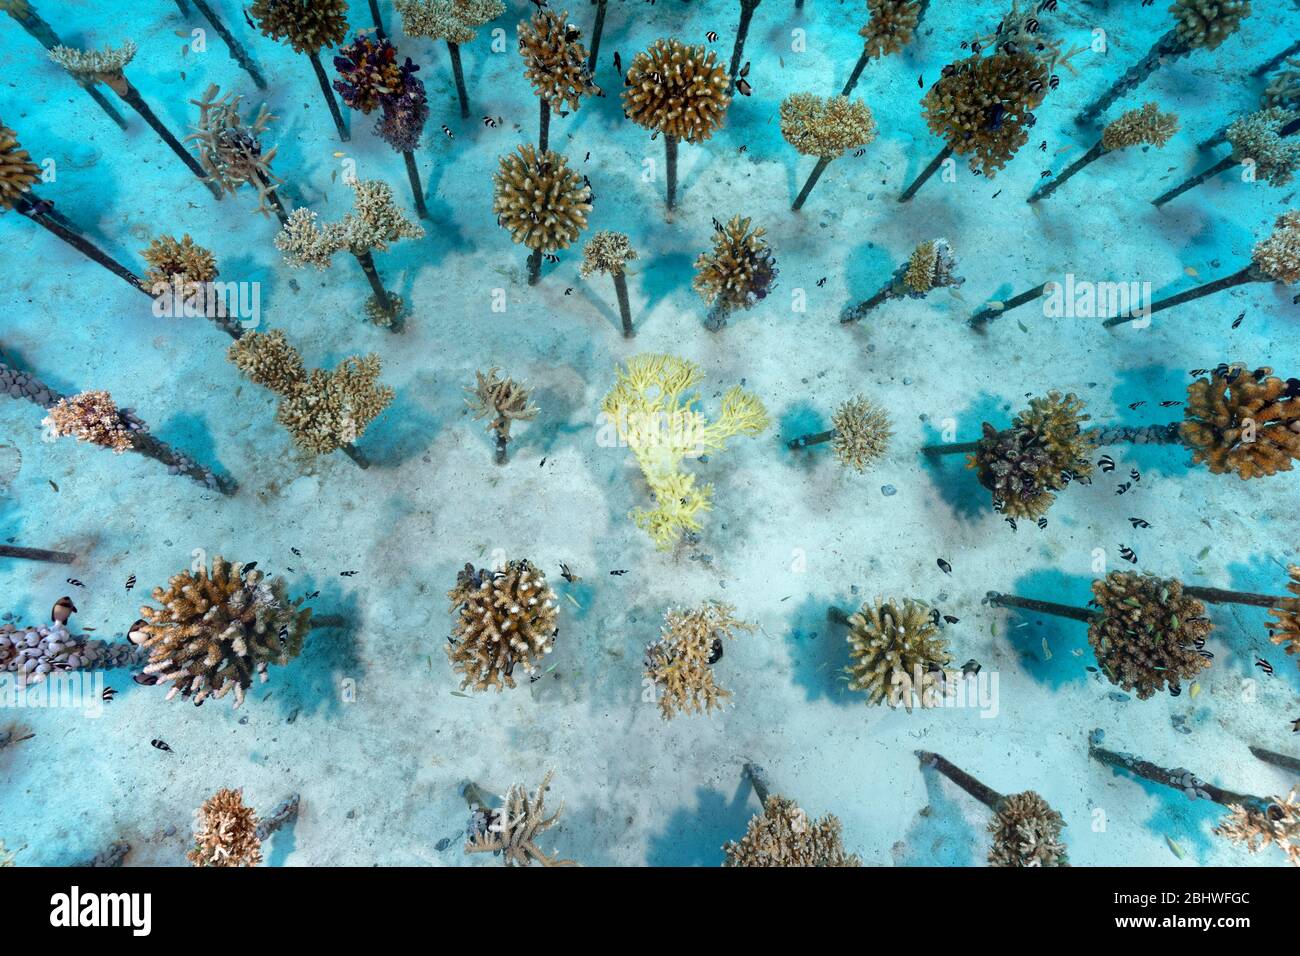 Coral breeding of stony corals (Scleractinia) on metal tubes, Indian Ocean, house reef Summer Island, North Male Atoll, Maldives Stock Photo